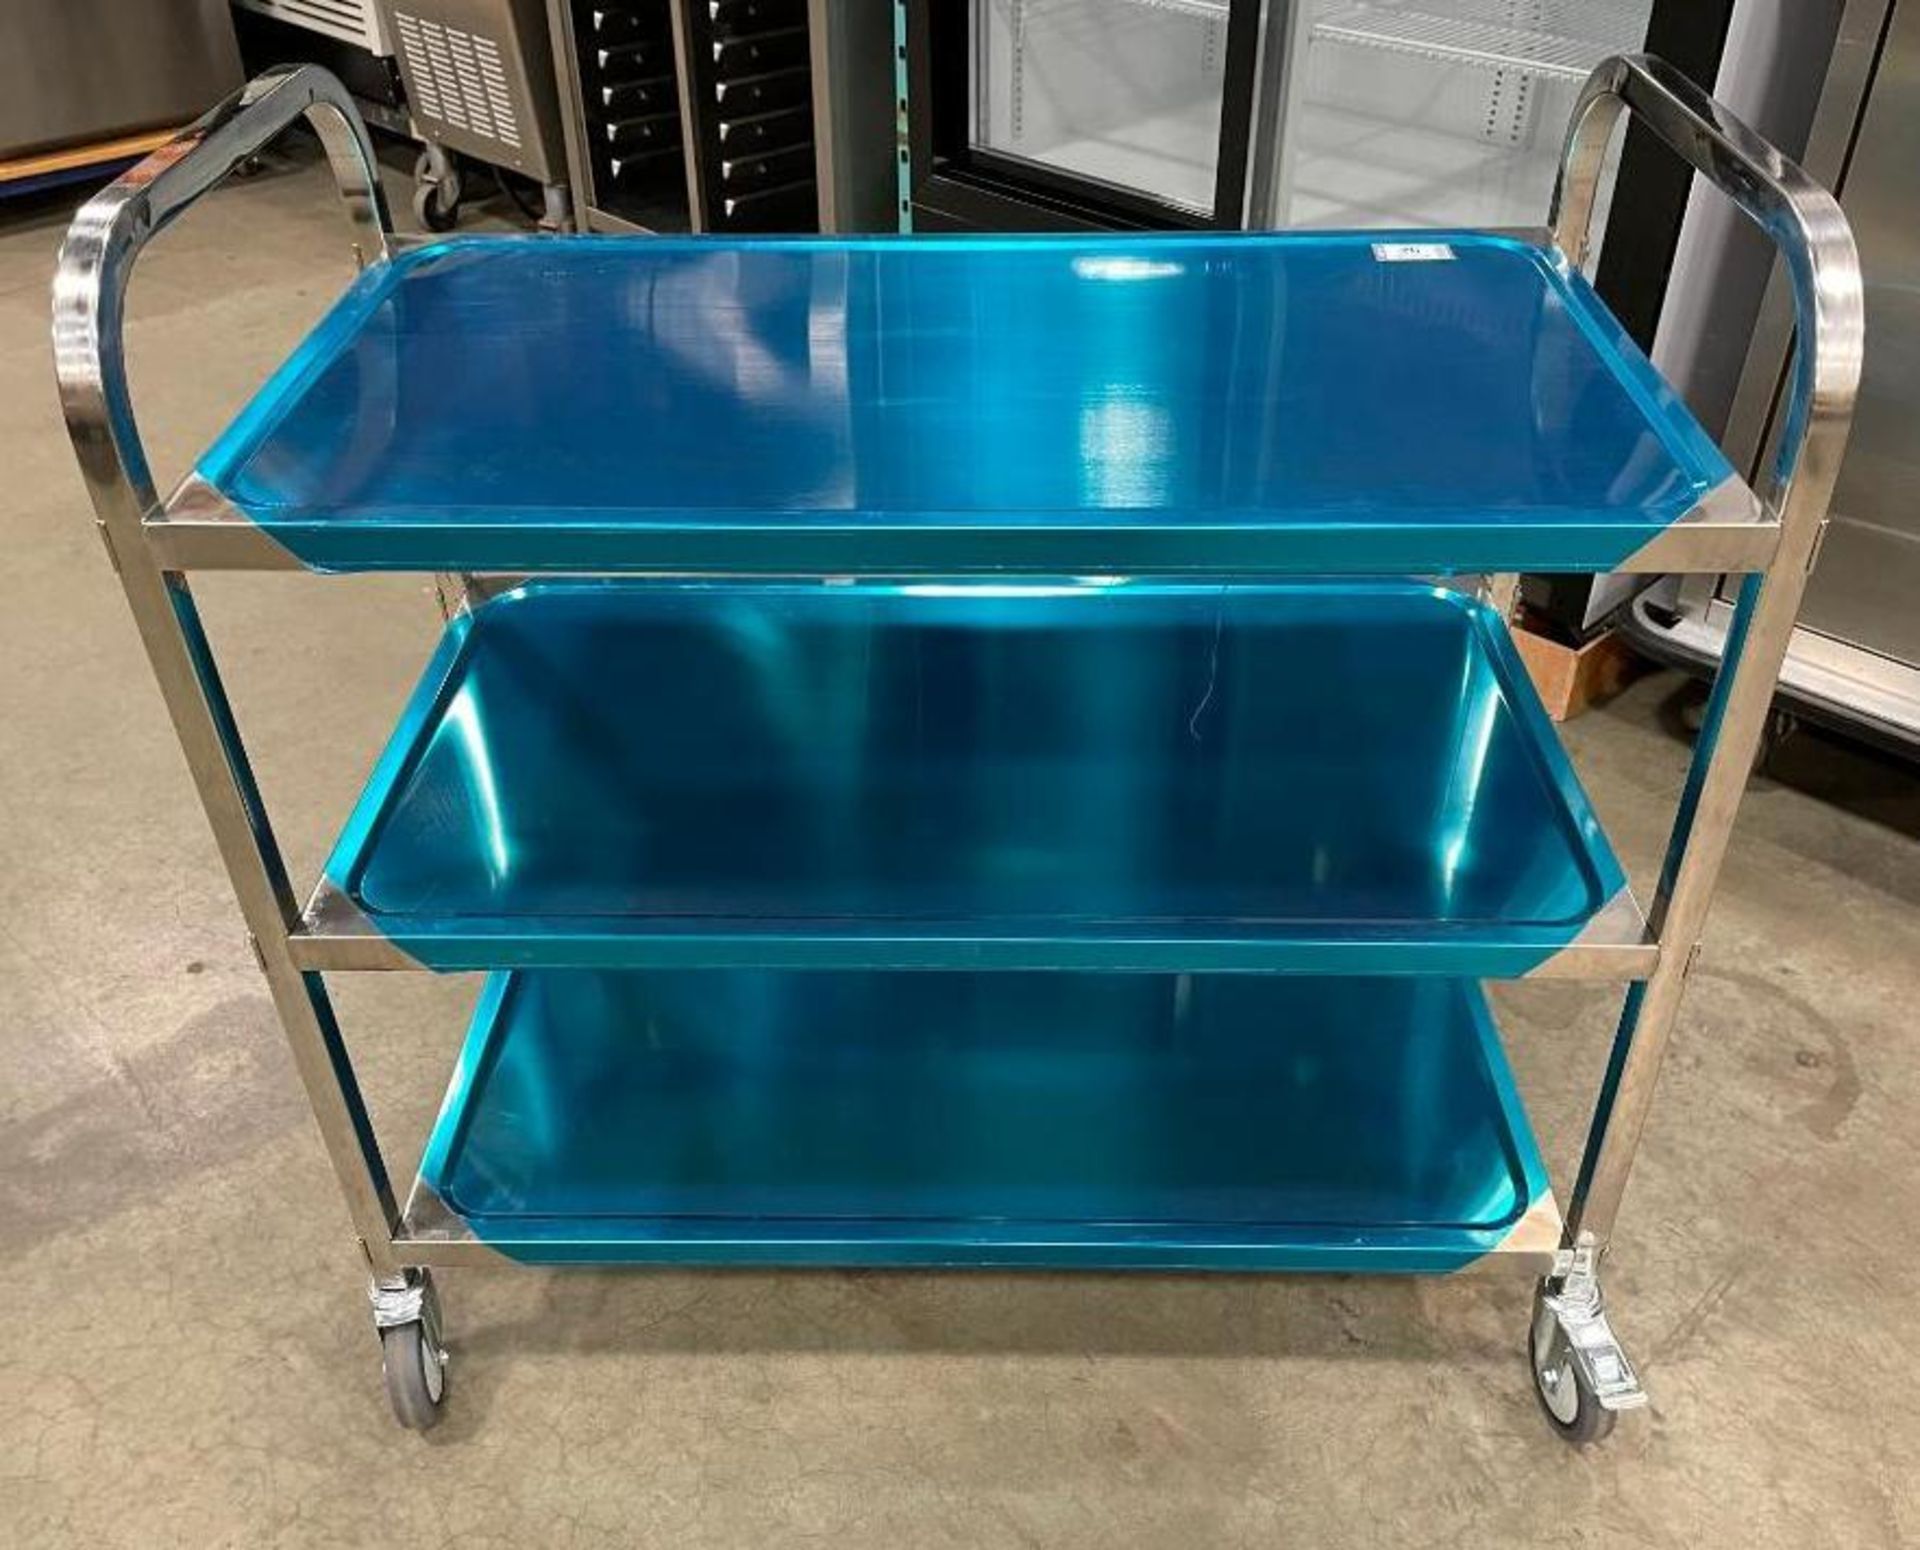 37" X 19" STAINLESS STEEL 3 TIER BUSSING CART - NEW - OMCAN 47151